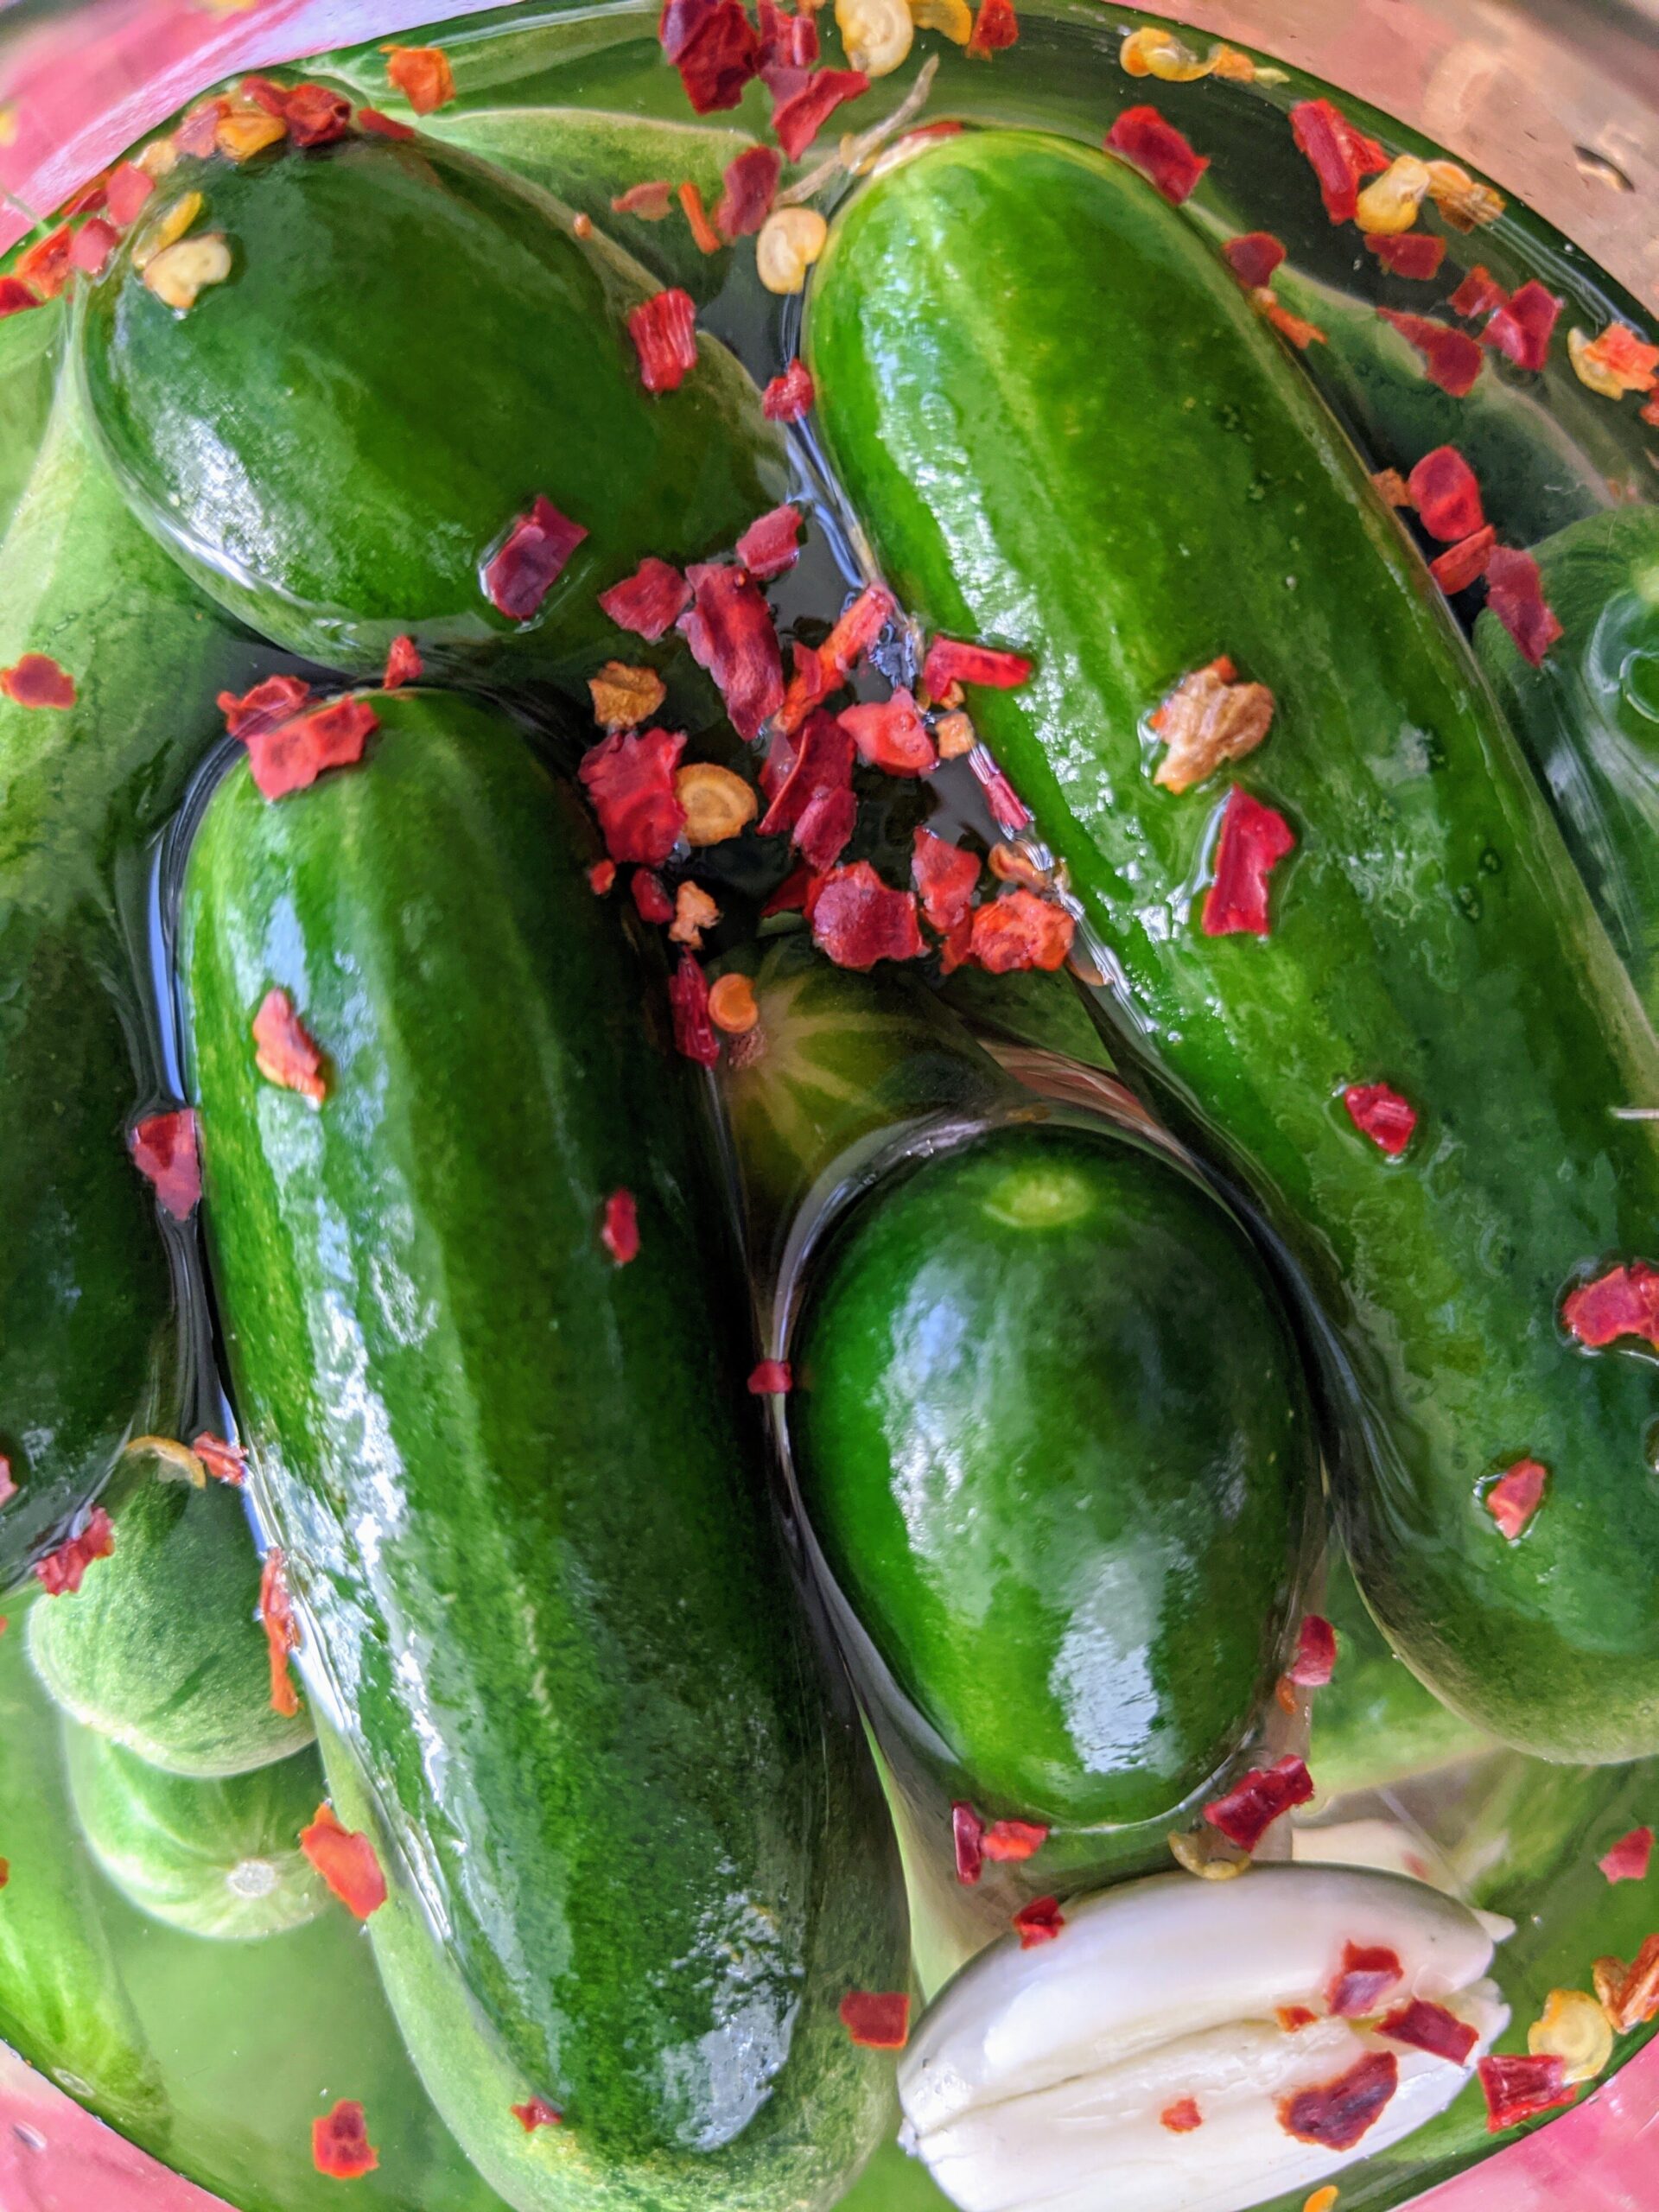 A close up of homemade dill pickles. Bright red chili flakes and a whole clove of garlic can be seen in the photo.